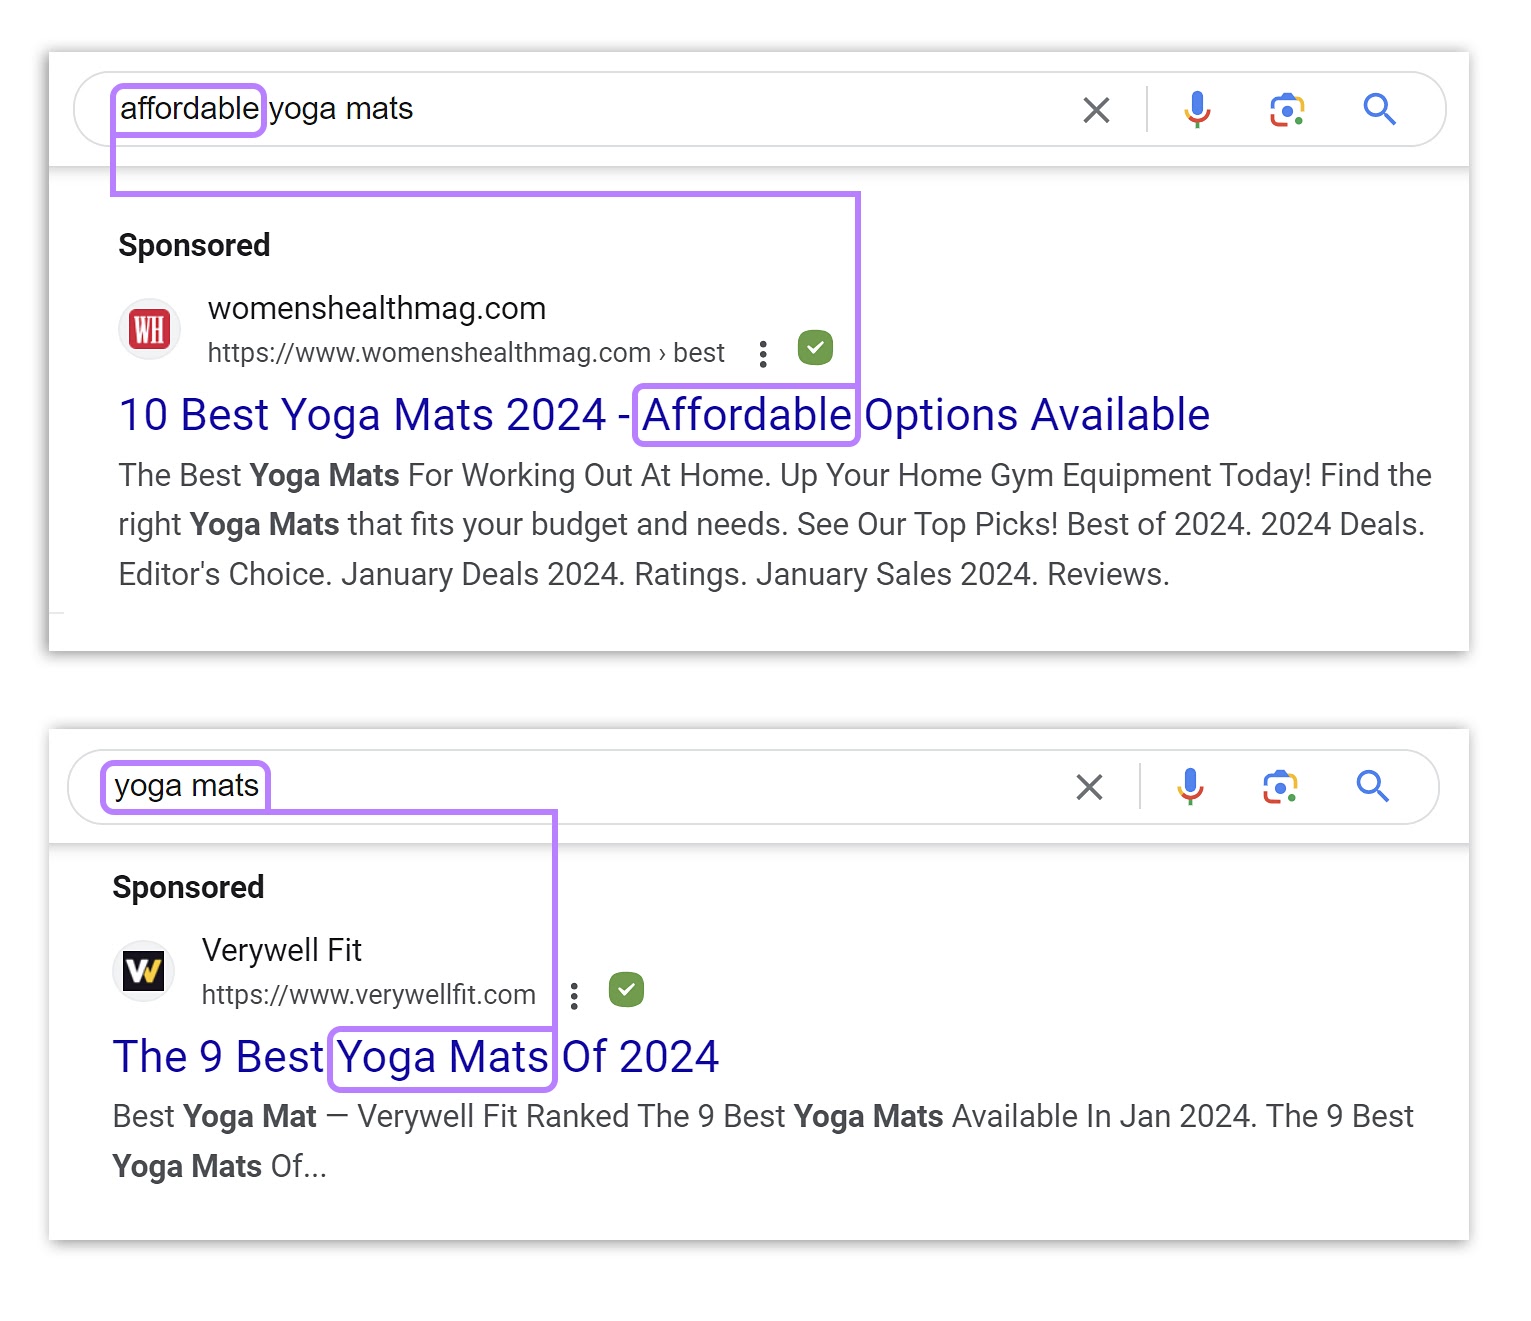 An ad containing “affordable yoga mats” is more likely to rank higher if users search for “affordable yoga mats” rather than just the “yoga mats”